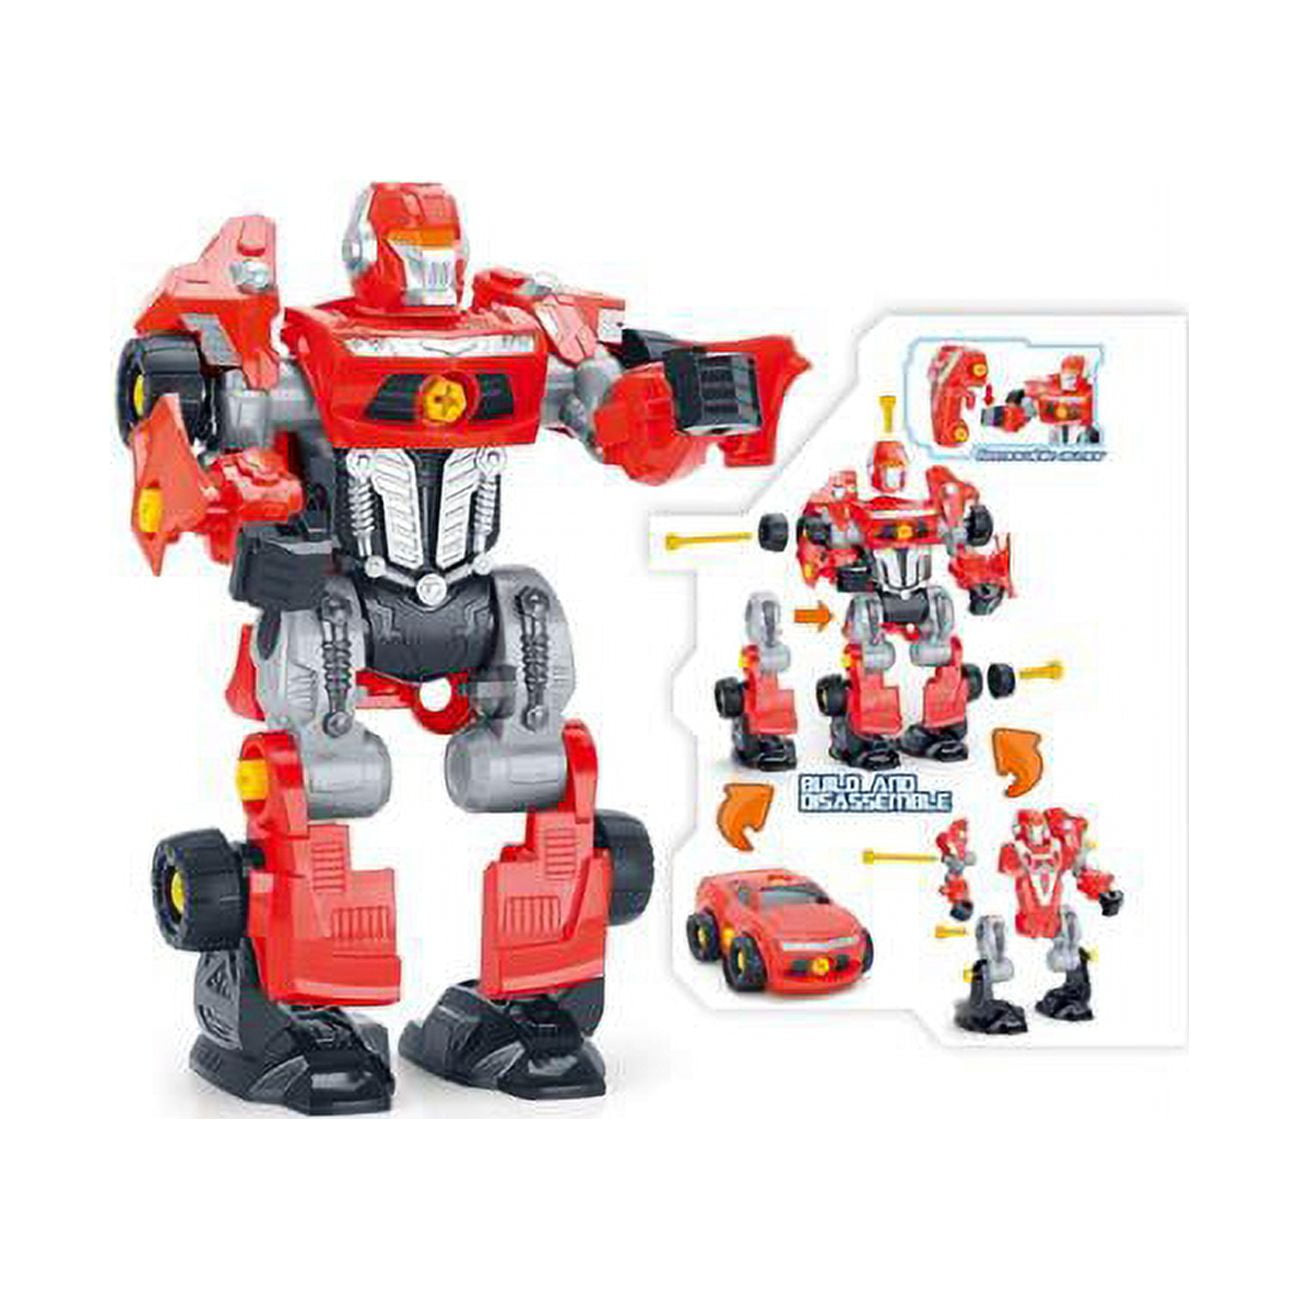 Ps1506 Red 3-in-1 Toy Robot Playset - 42 Modification Pieces, Electric Play Drill & Screwdriver, Red